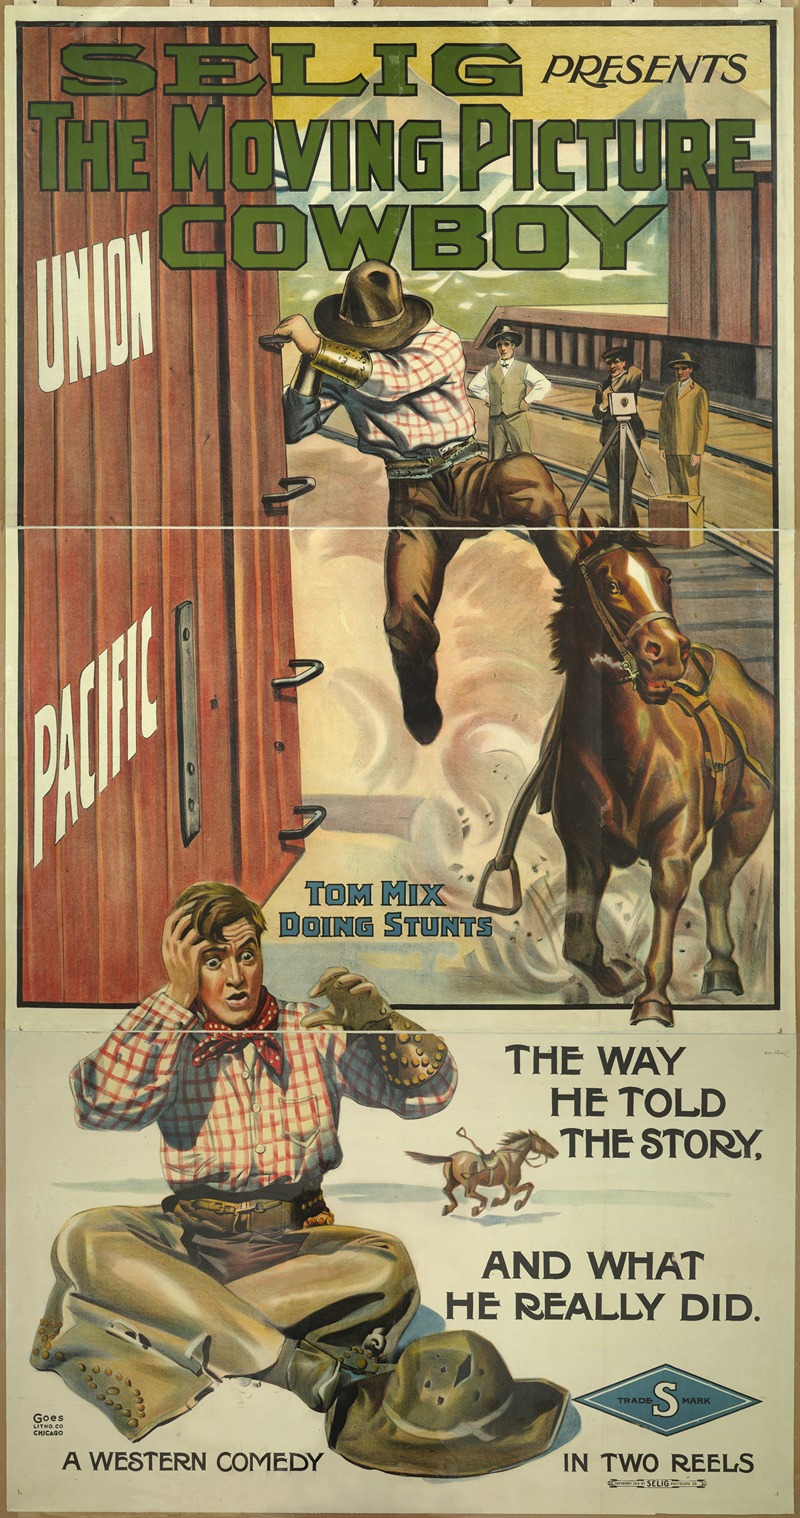 Goes Litho. Co. - The Moving Picture Cowboy Tom Mix doing stunts. The way he told the story, and what he really did.